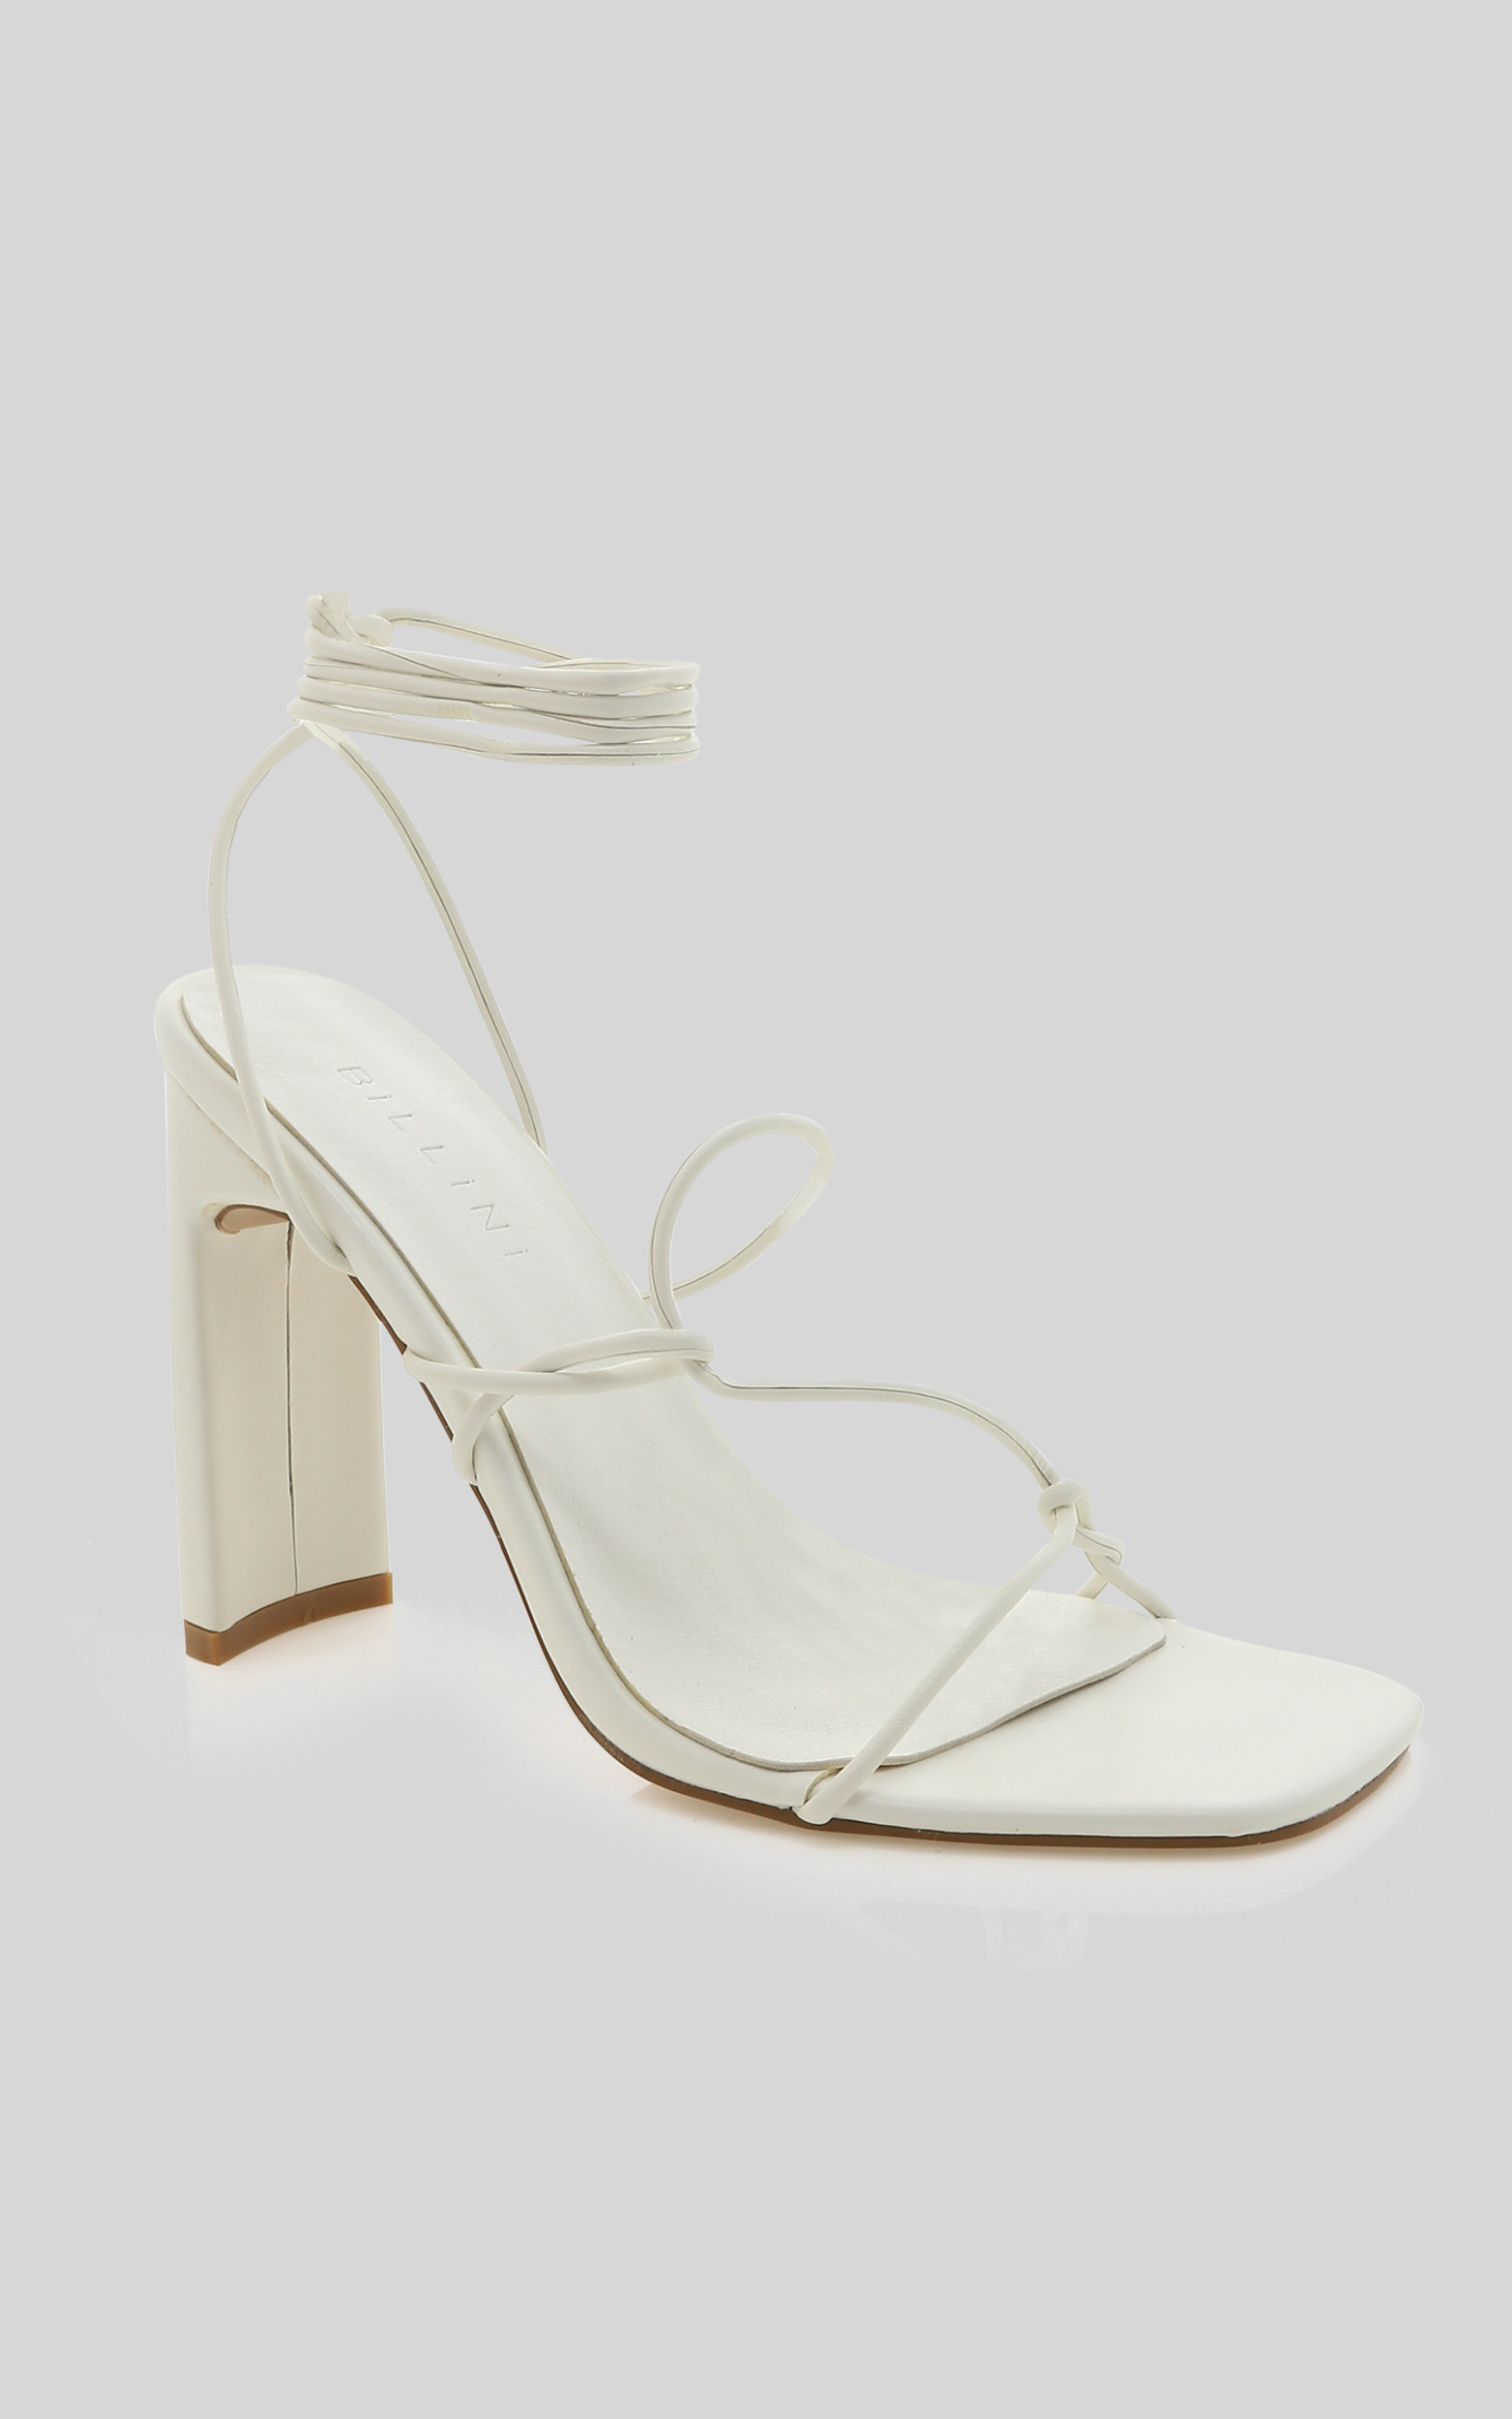 Billini - Hades Heels in White - 06, WHT2, hi-res image number null